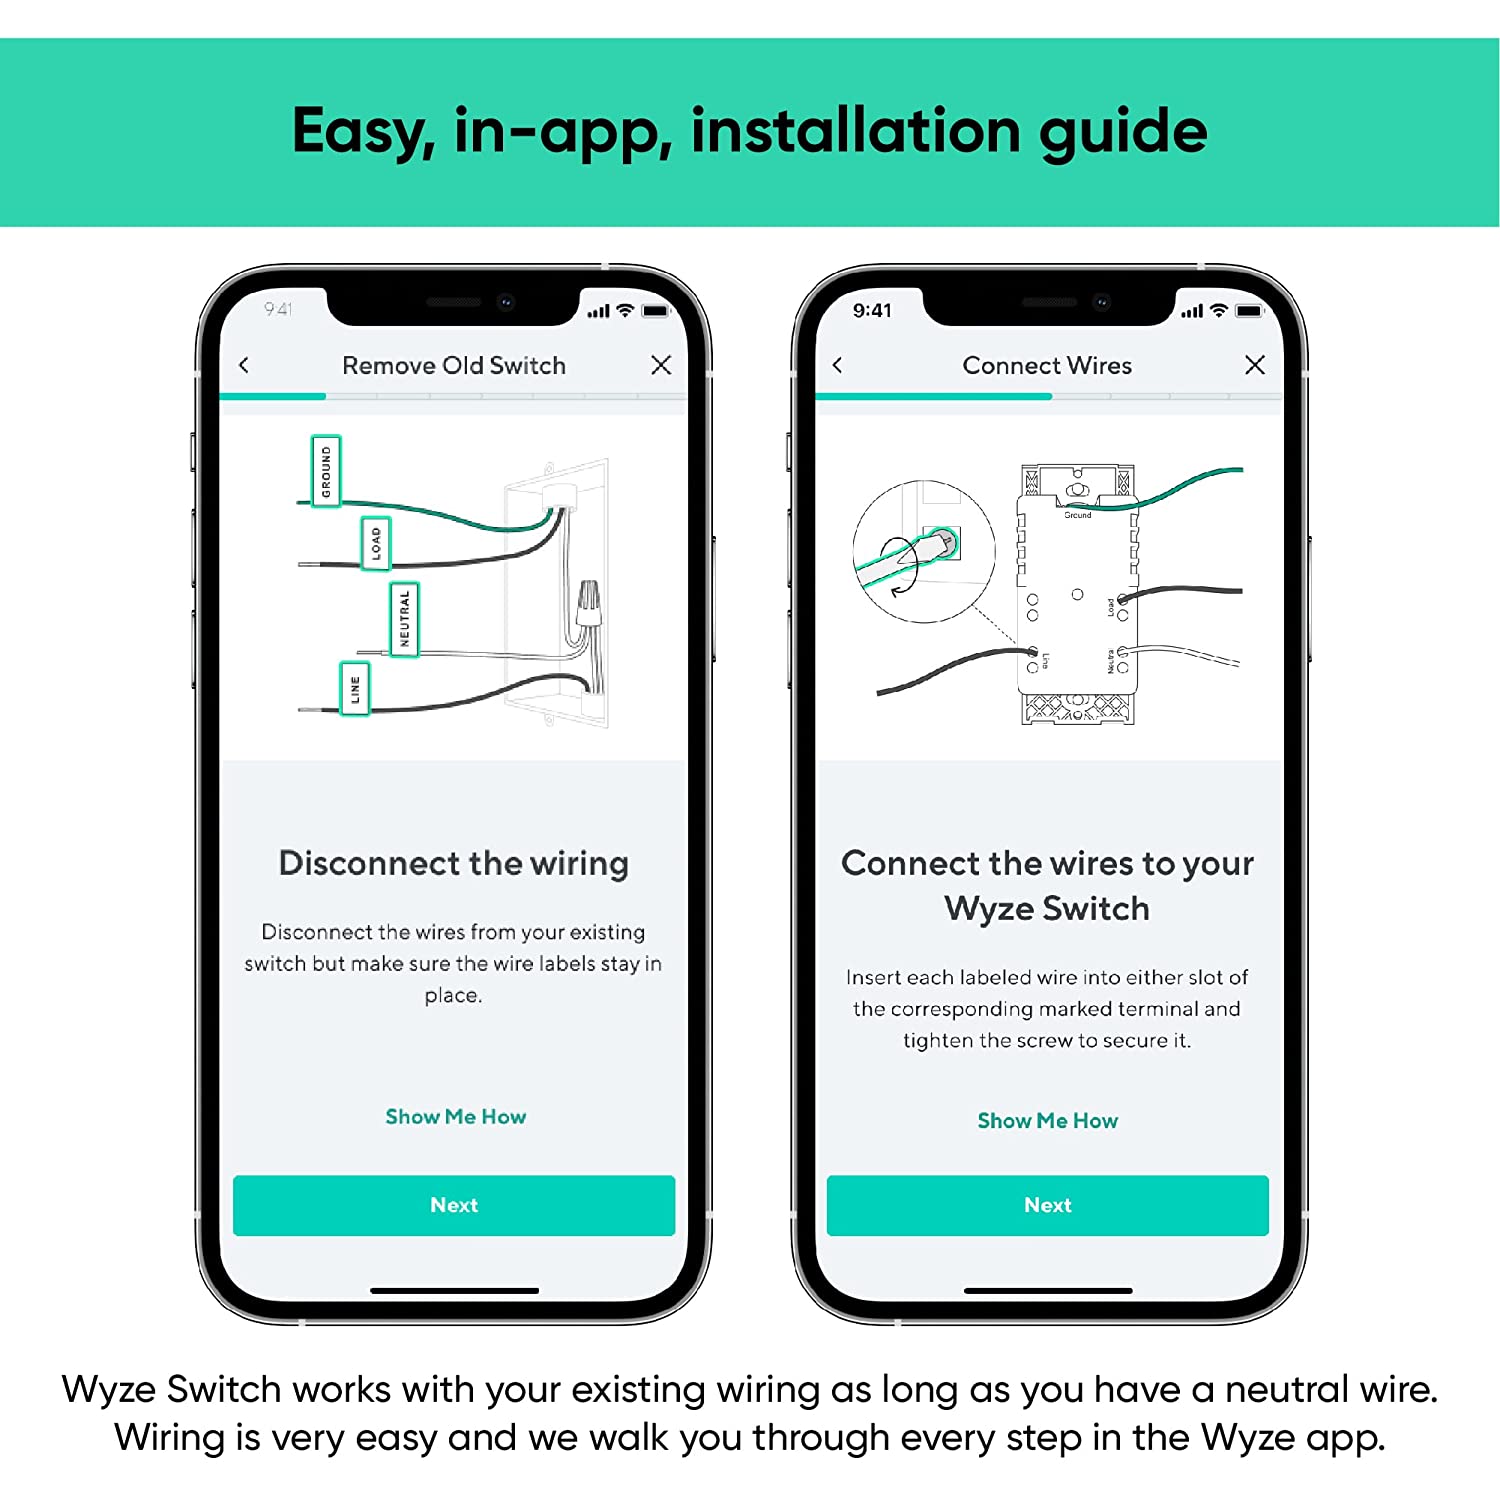 Smartphone with installation guide open. Text overlay that says "Easy, in-app, installation guide."